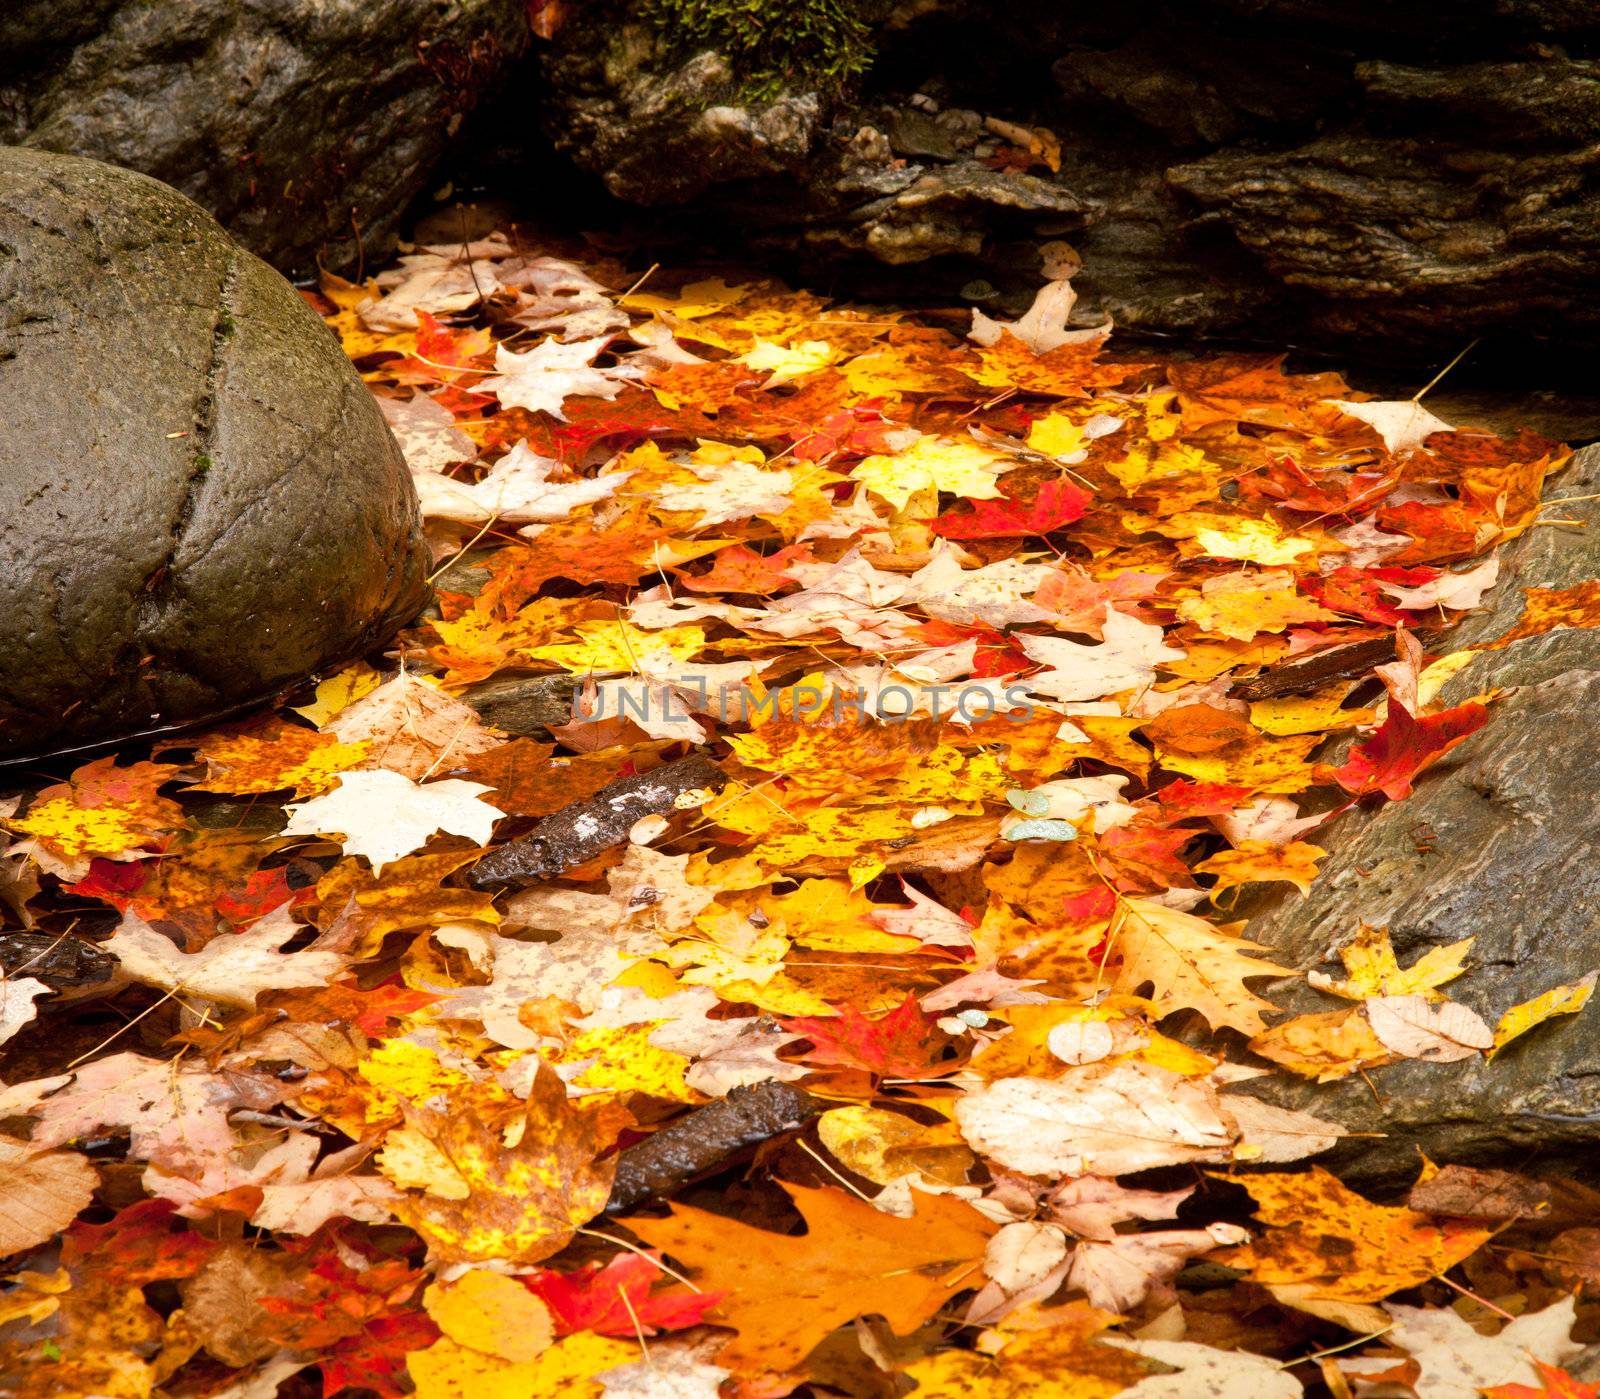 Brightly colored autumn leaves in a shallow river with rocks